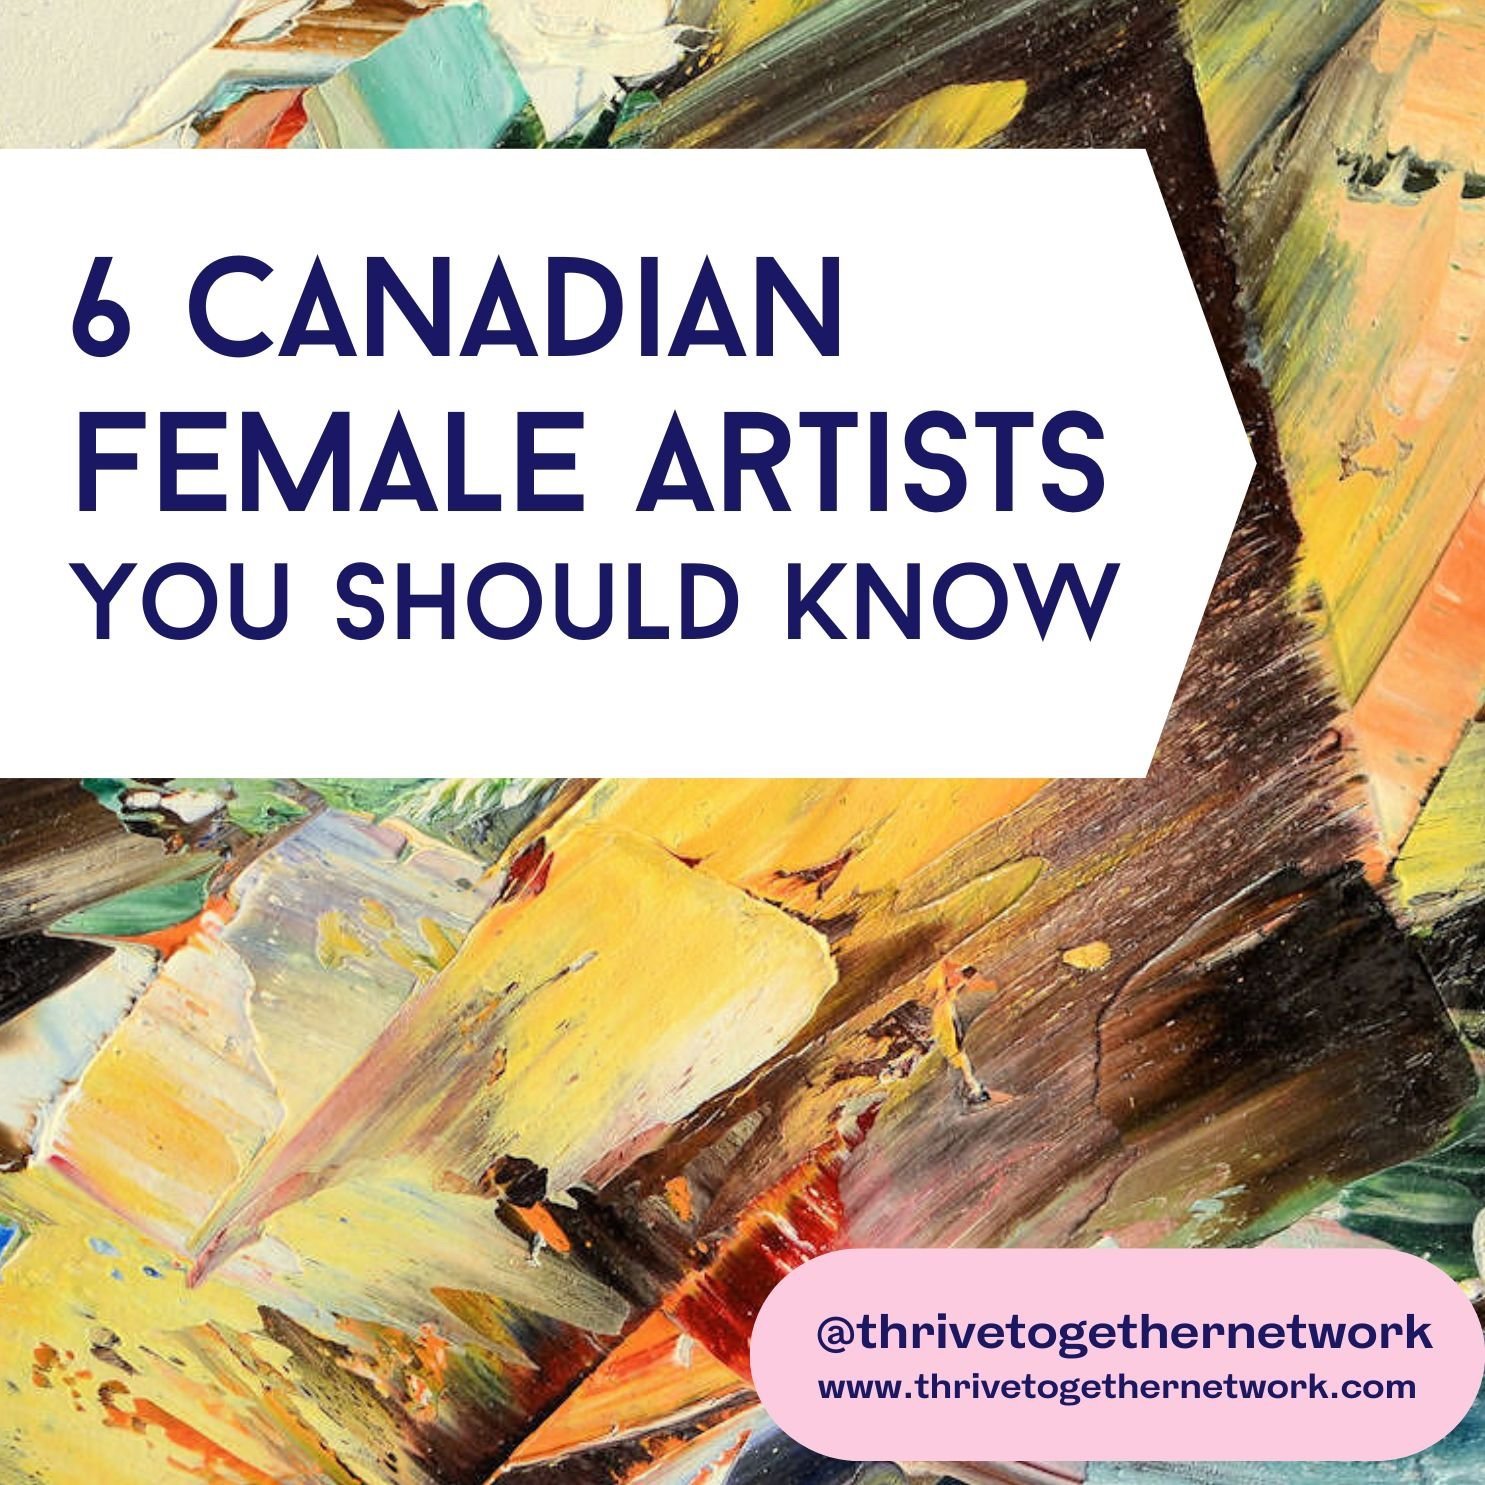 6 Canadian Female Artists You Should Know